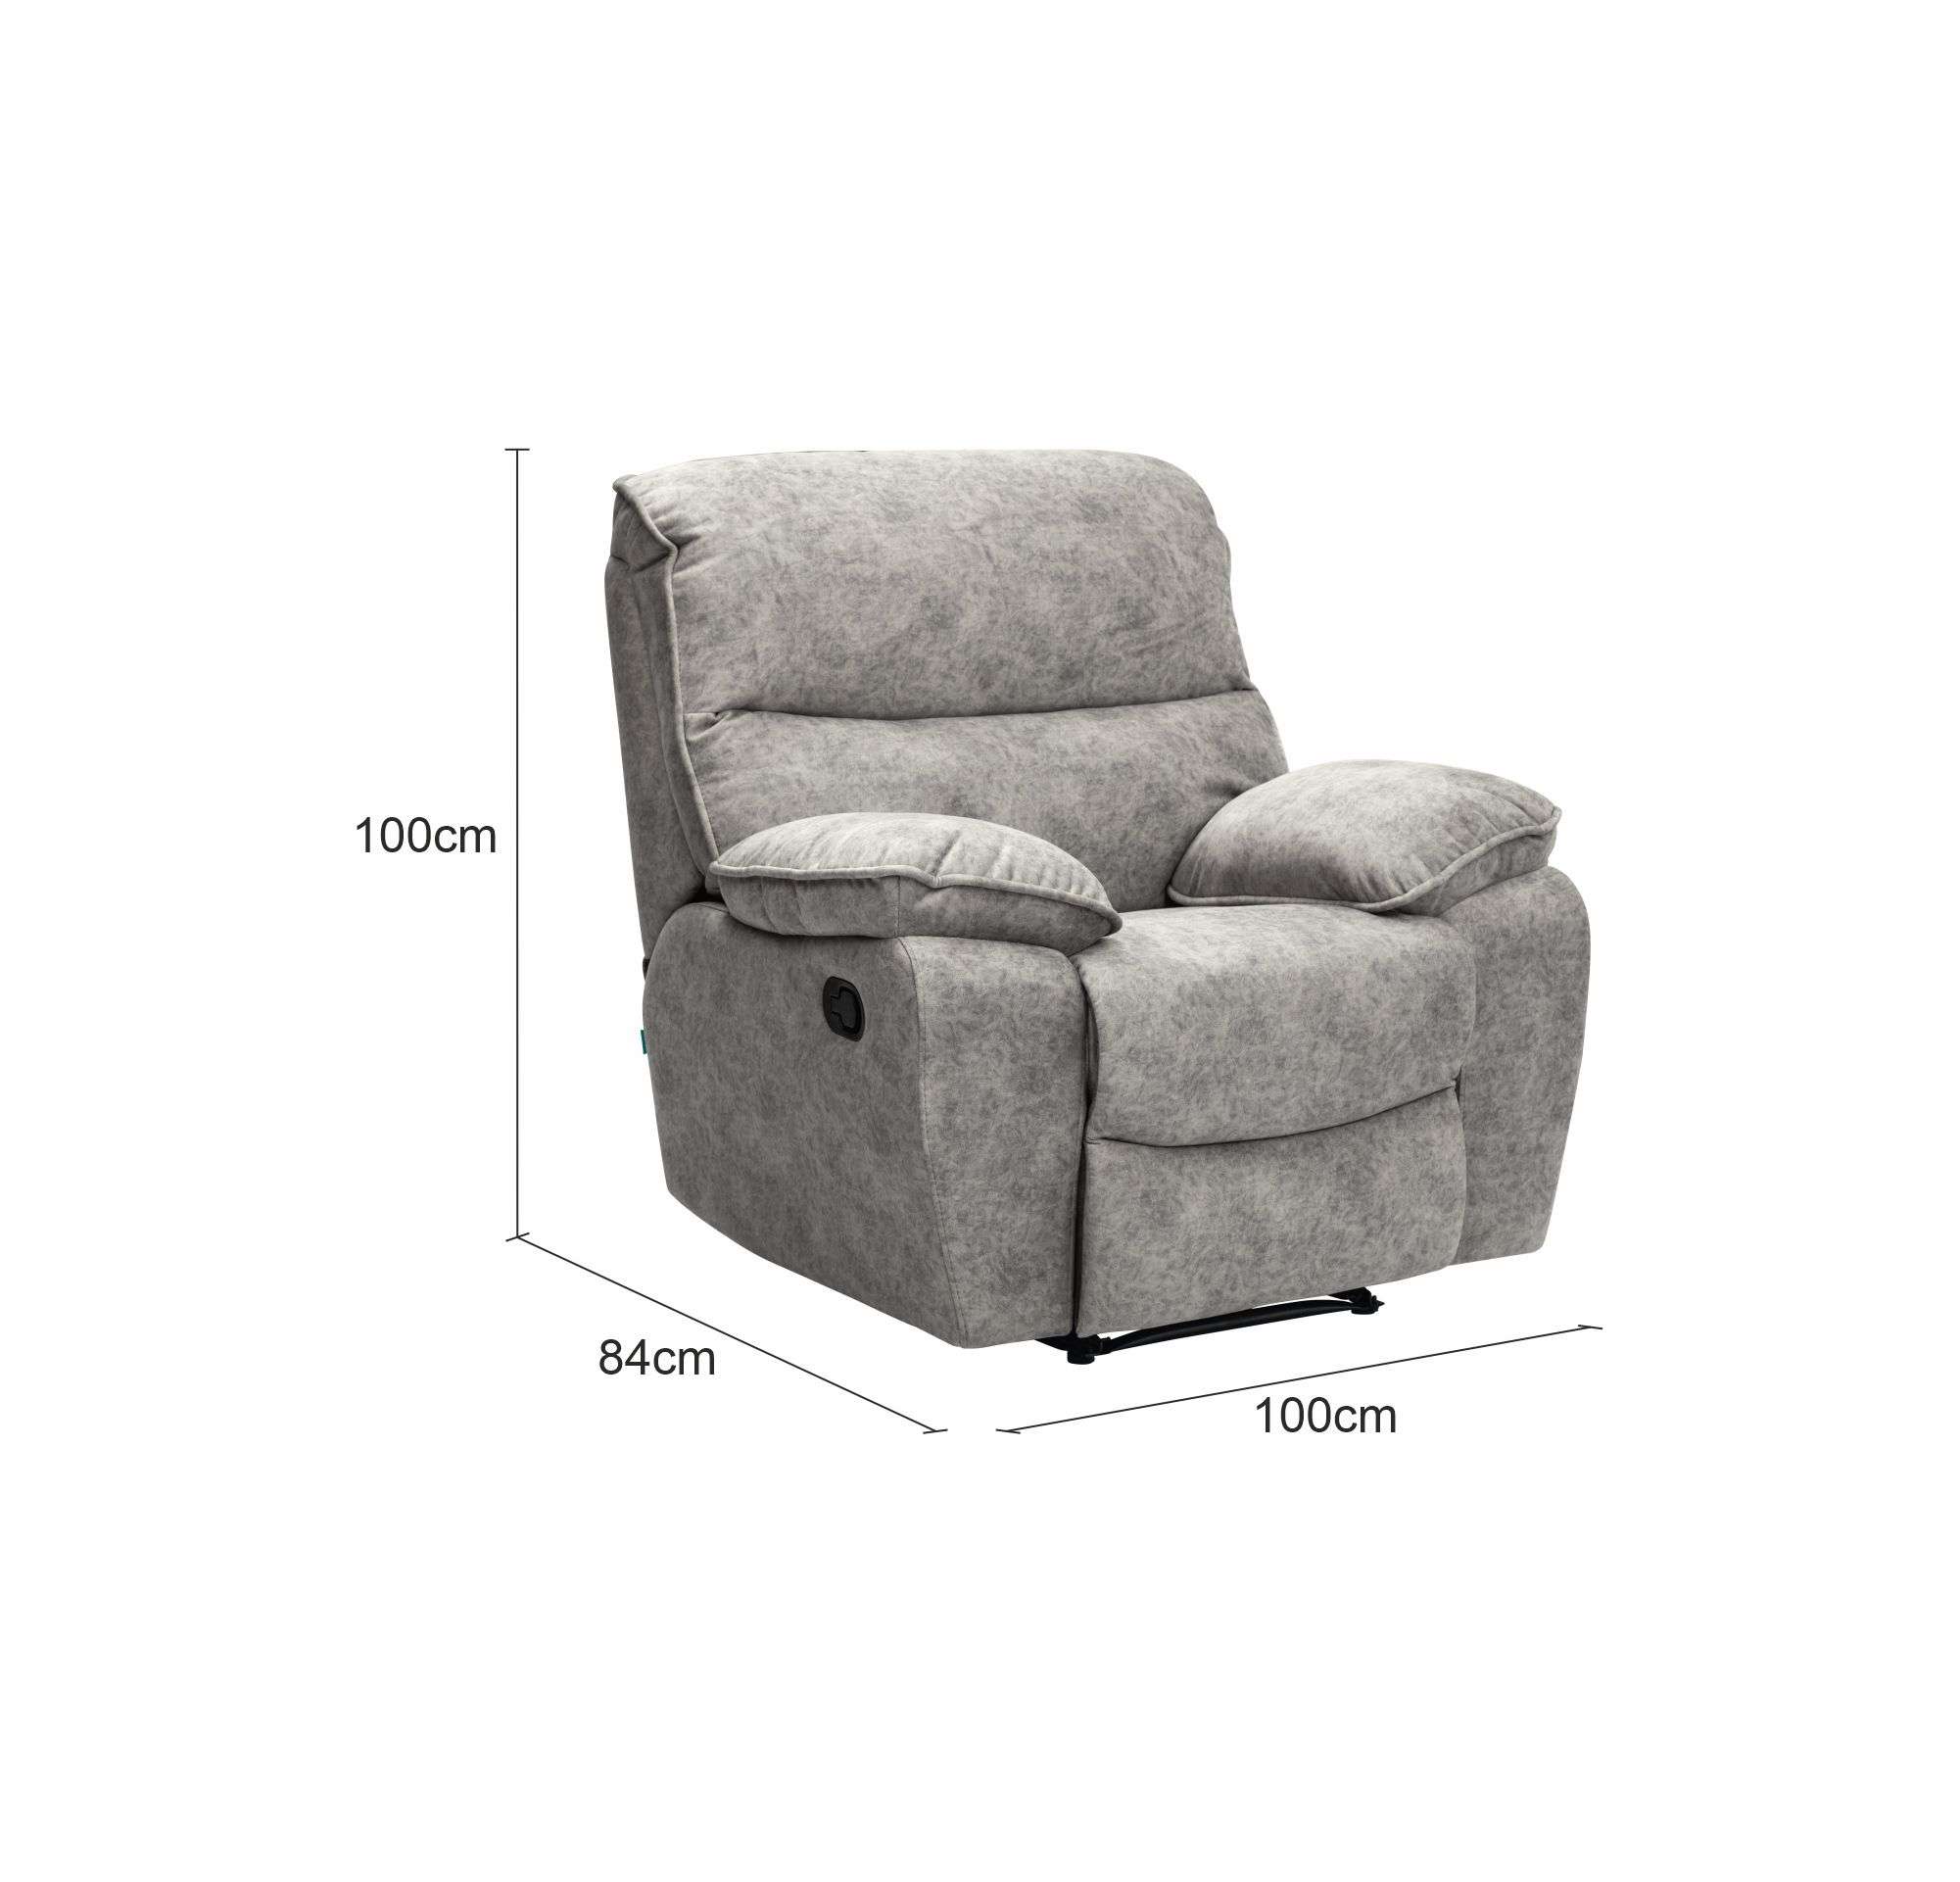 SZN001R-Zenica Sofa 1 Seater With Recliners-NAM04